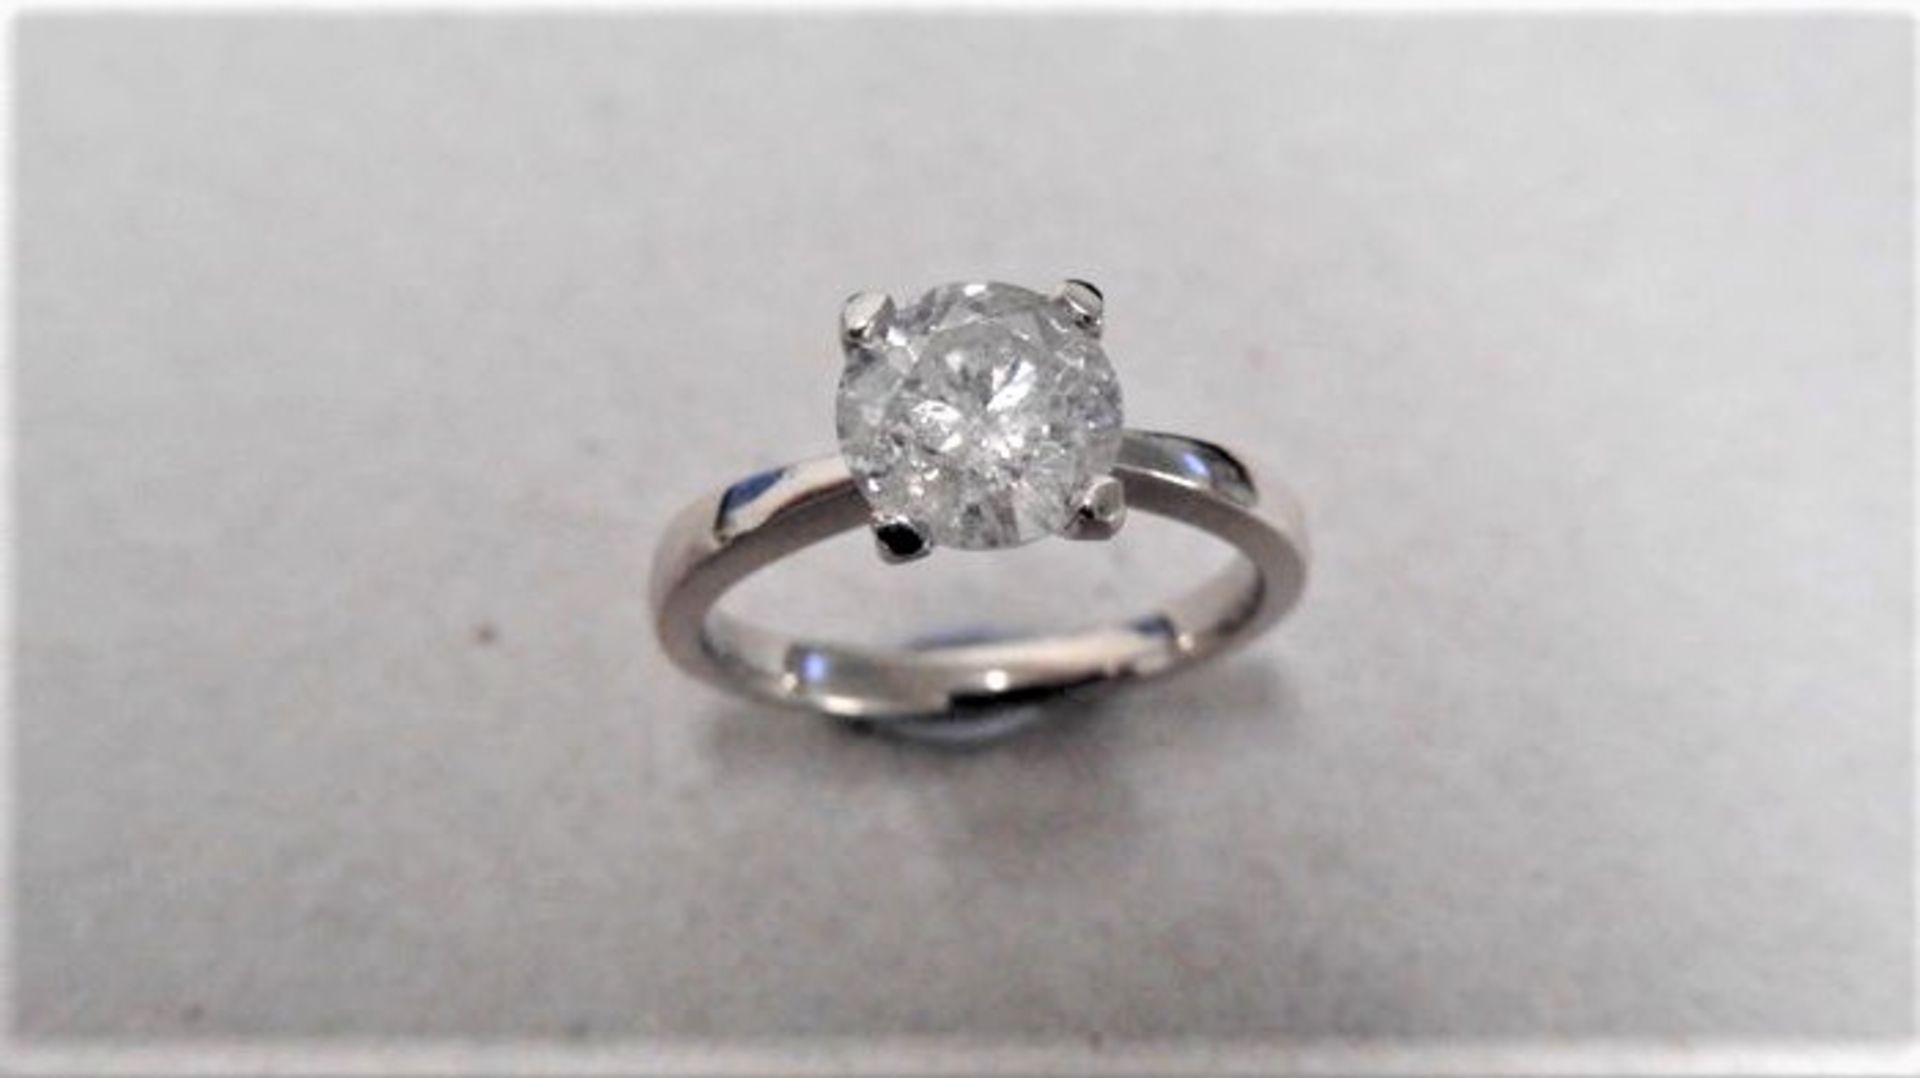 1.72ct diamond solitaire ring set in 18ct white gold. I colour and I2 clarity. 4 claw setting.